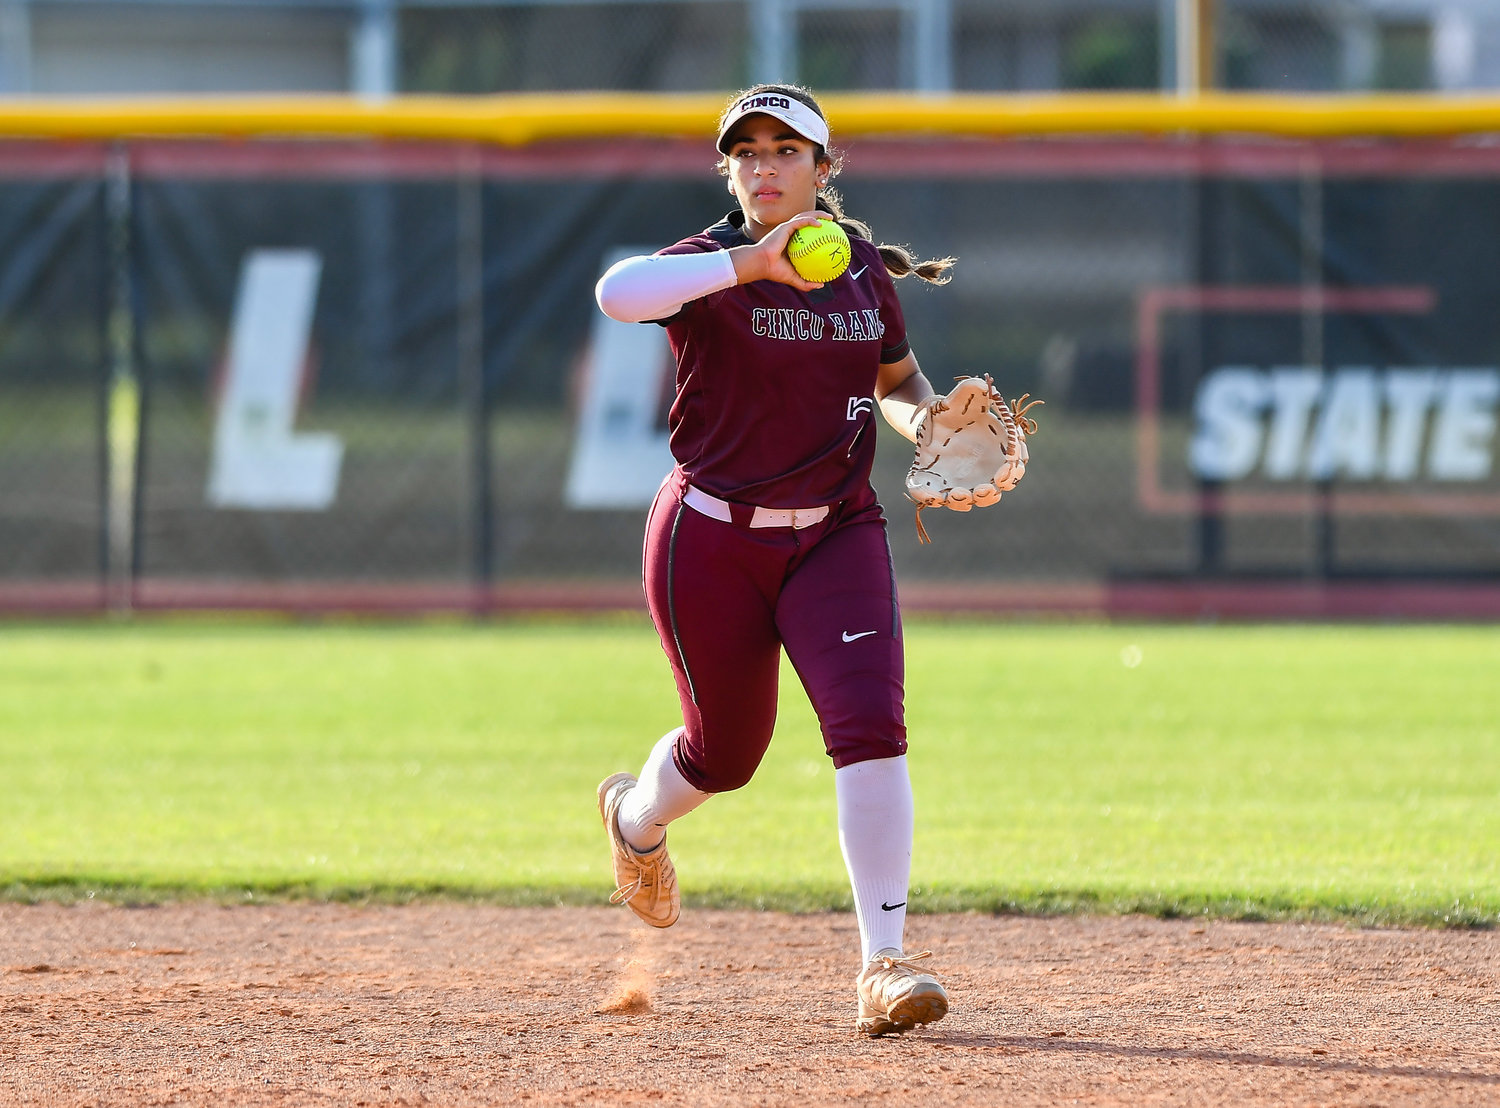 May 13, 2022: Cinco Ranch's Gissel Morales #7 makes the catch for an out during the Regional Quarterfinal playoff between Katy and Cinco Ranch at Katy HS. (Photo by Mark Goodman / Katy Times)